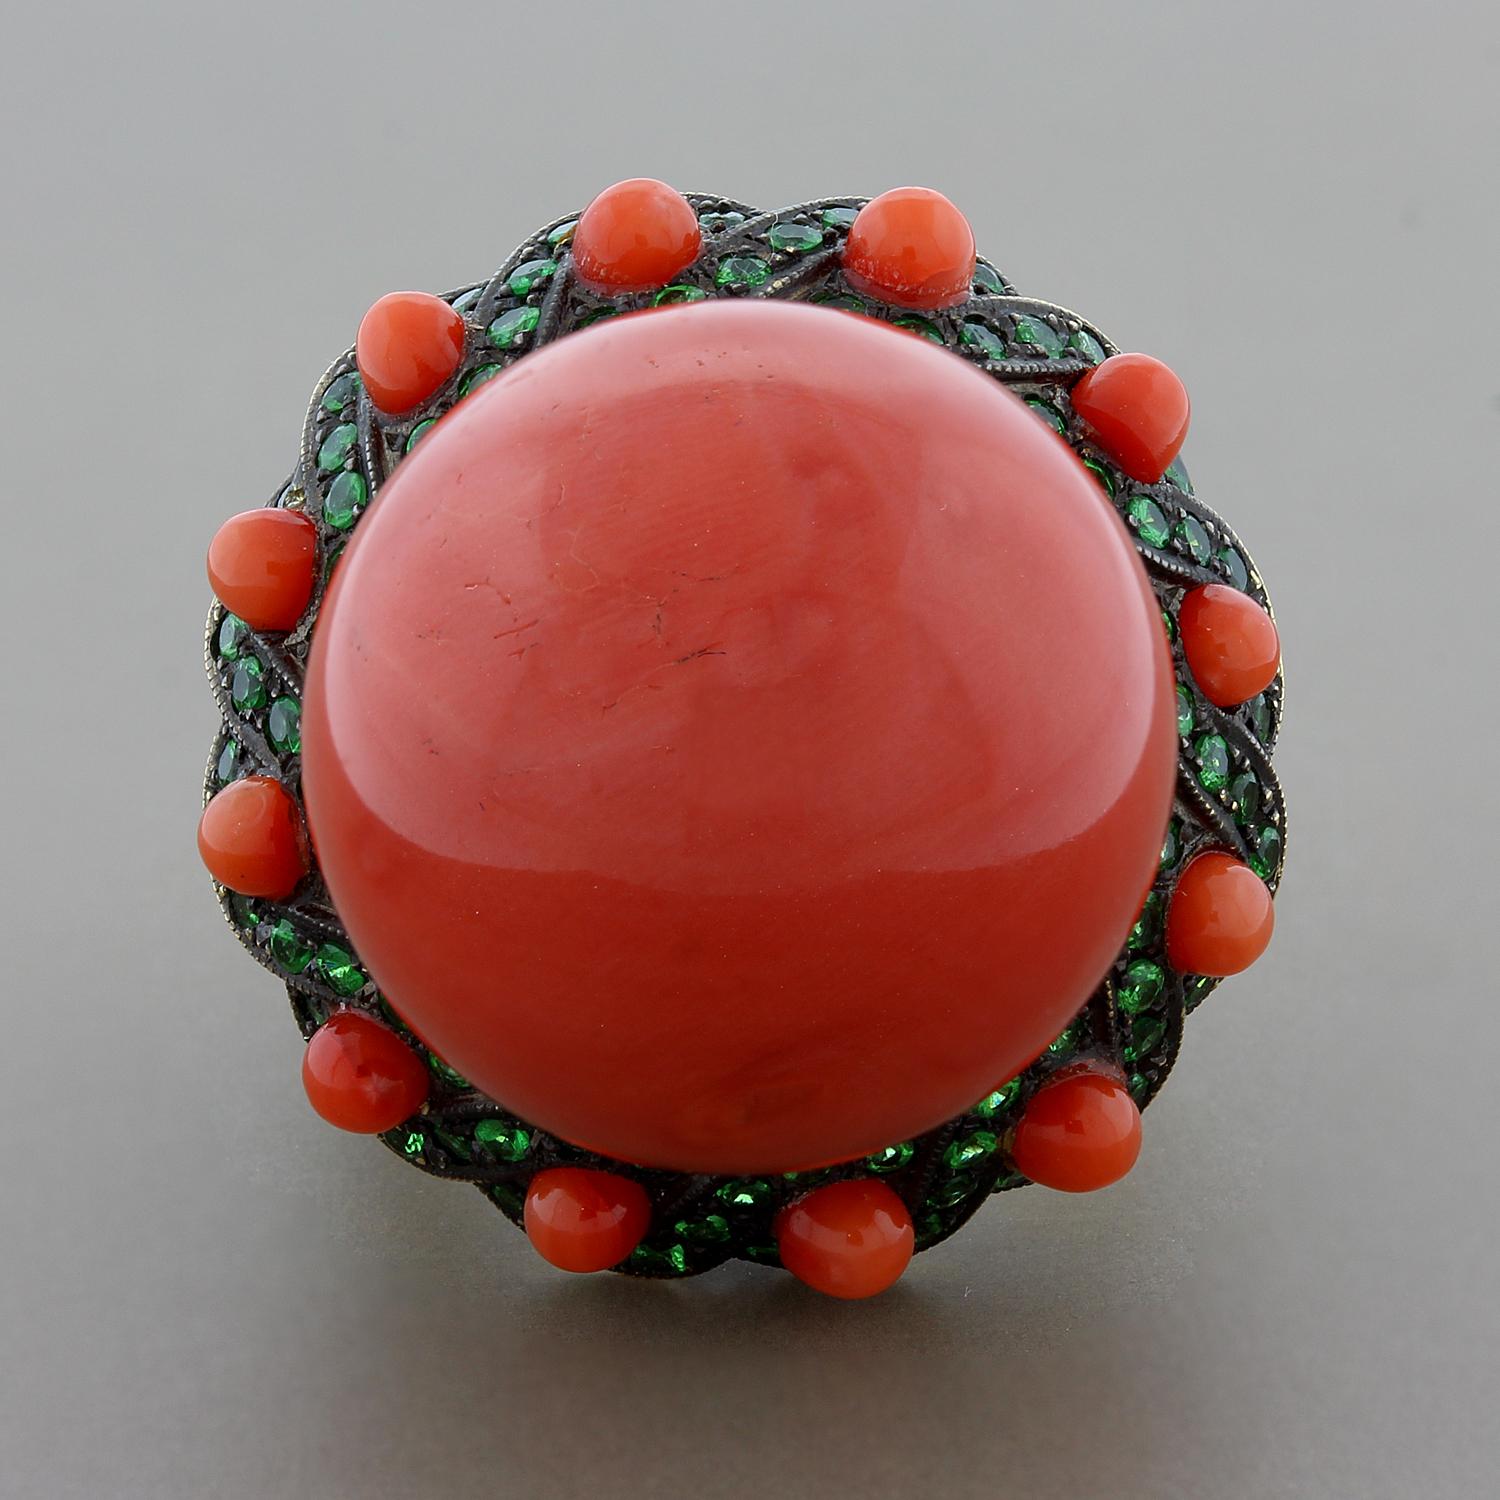 Straight from the reefs! Indulge in this extremely rare 21.3mm piece of coral, perfectly round. The massive coral bead is accented by bright green tsavorite and smaller coral beads, set in 18K yellow gold with a black rhodium finish giving the piece